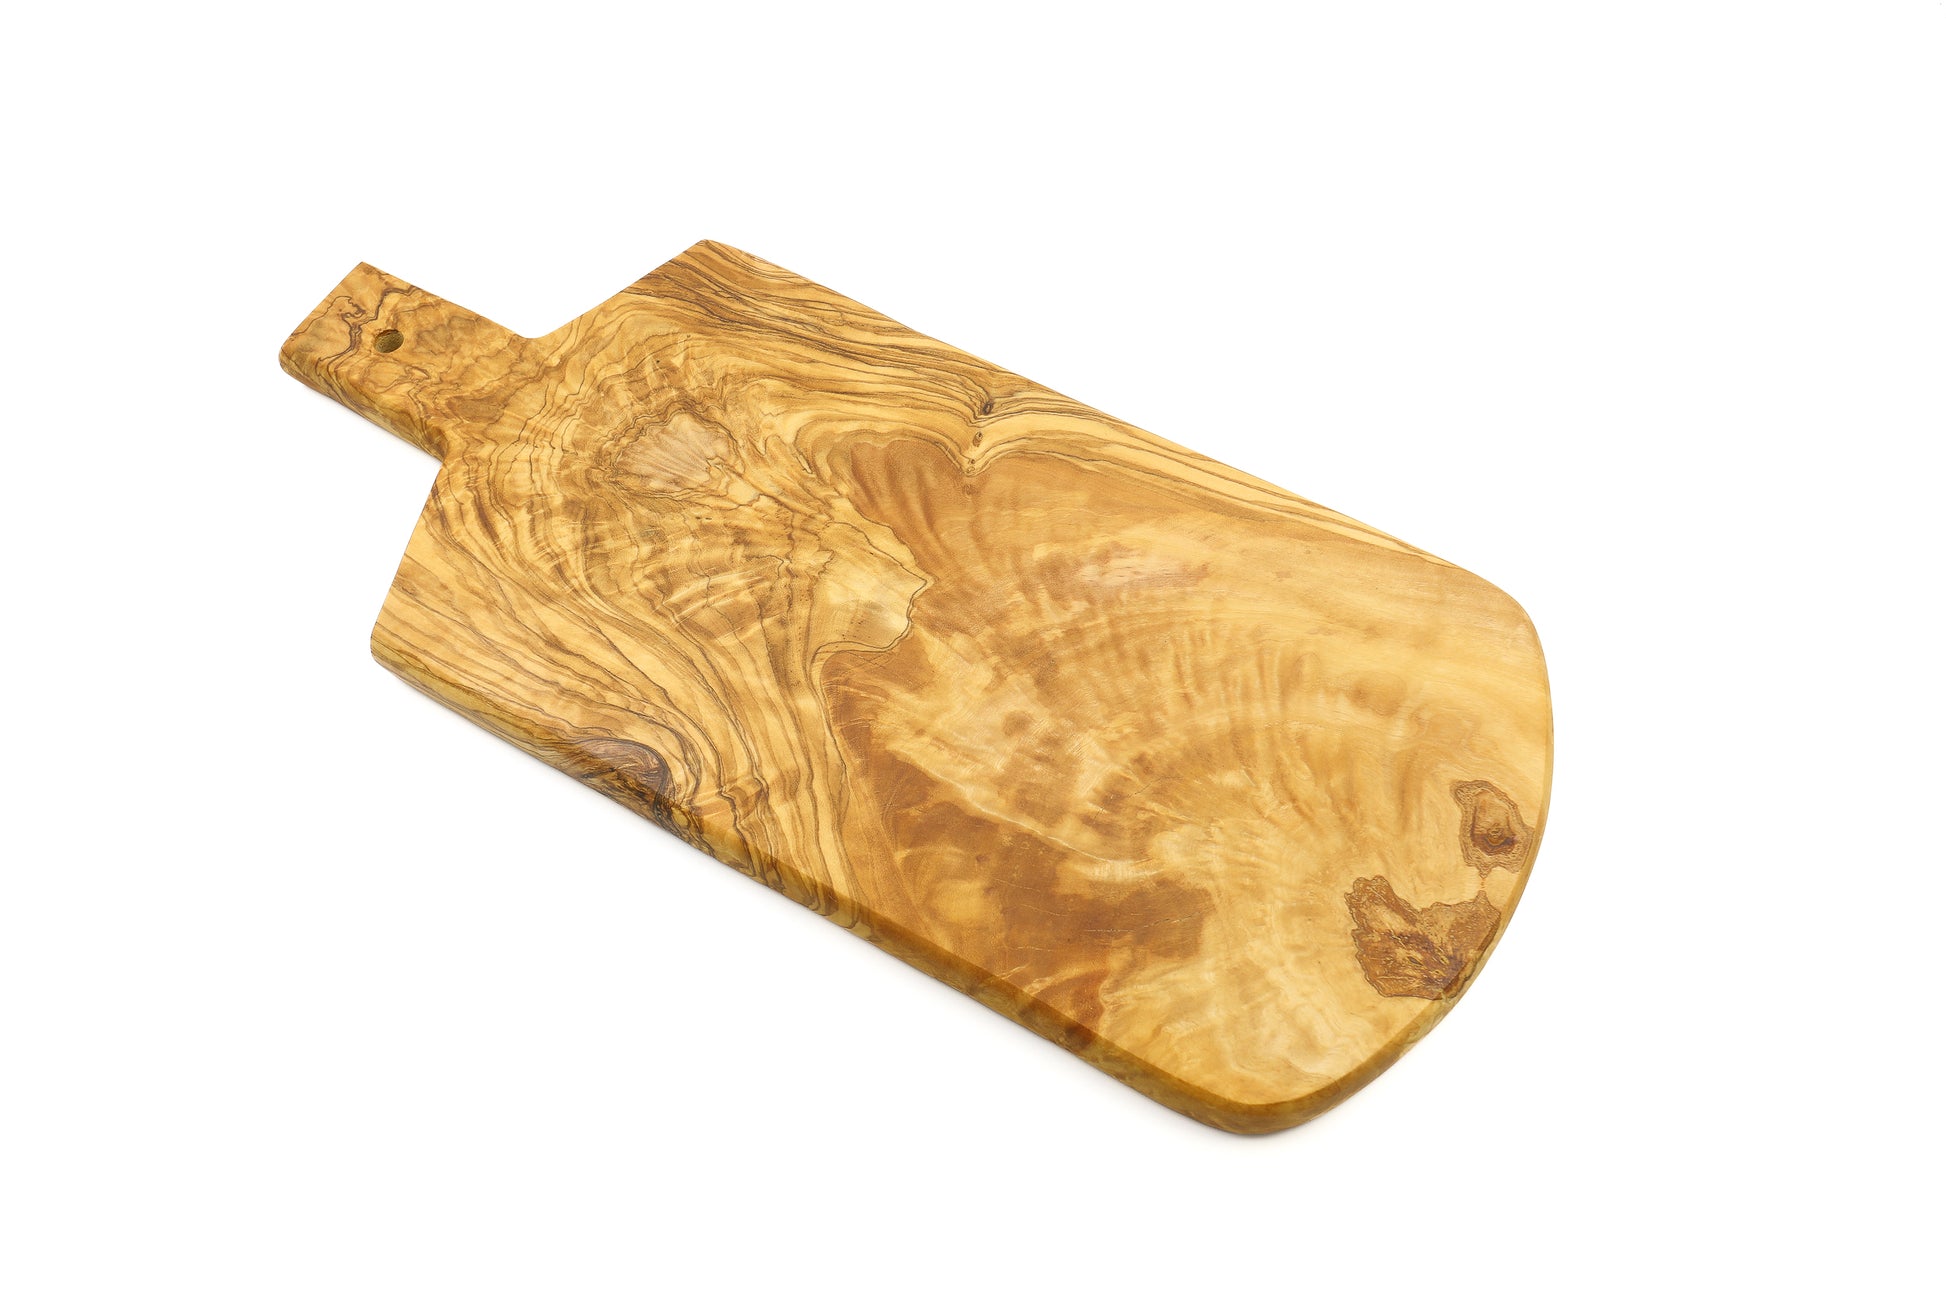 Shield-inspired olive wood serving board with a convenient handle